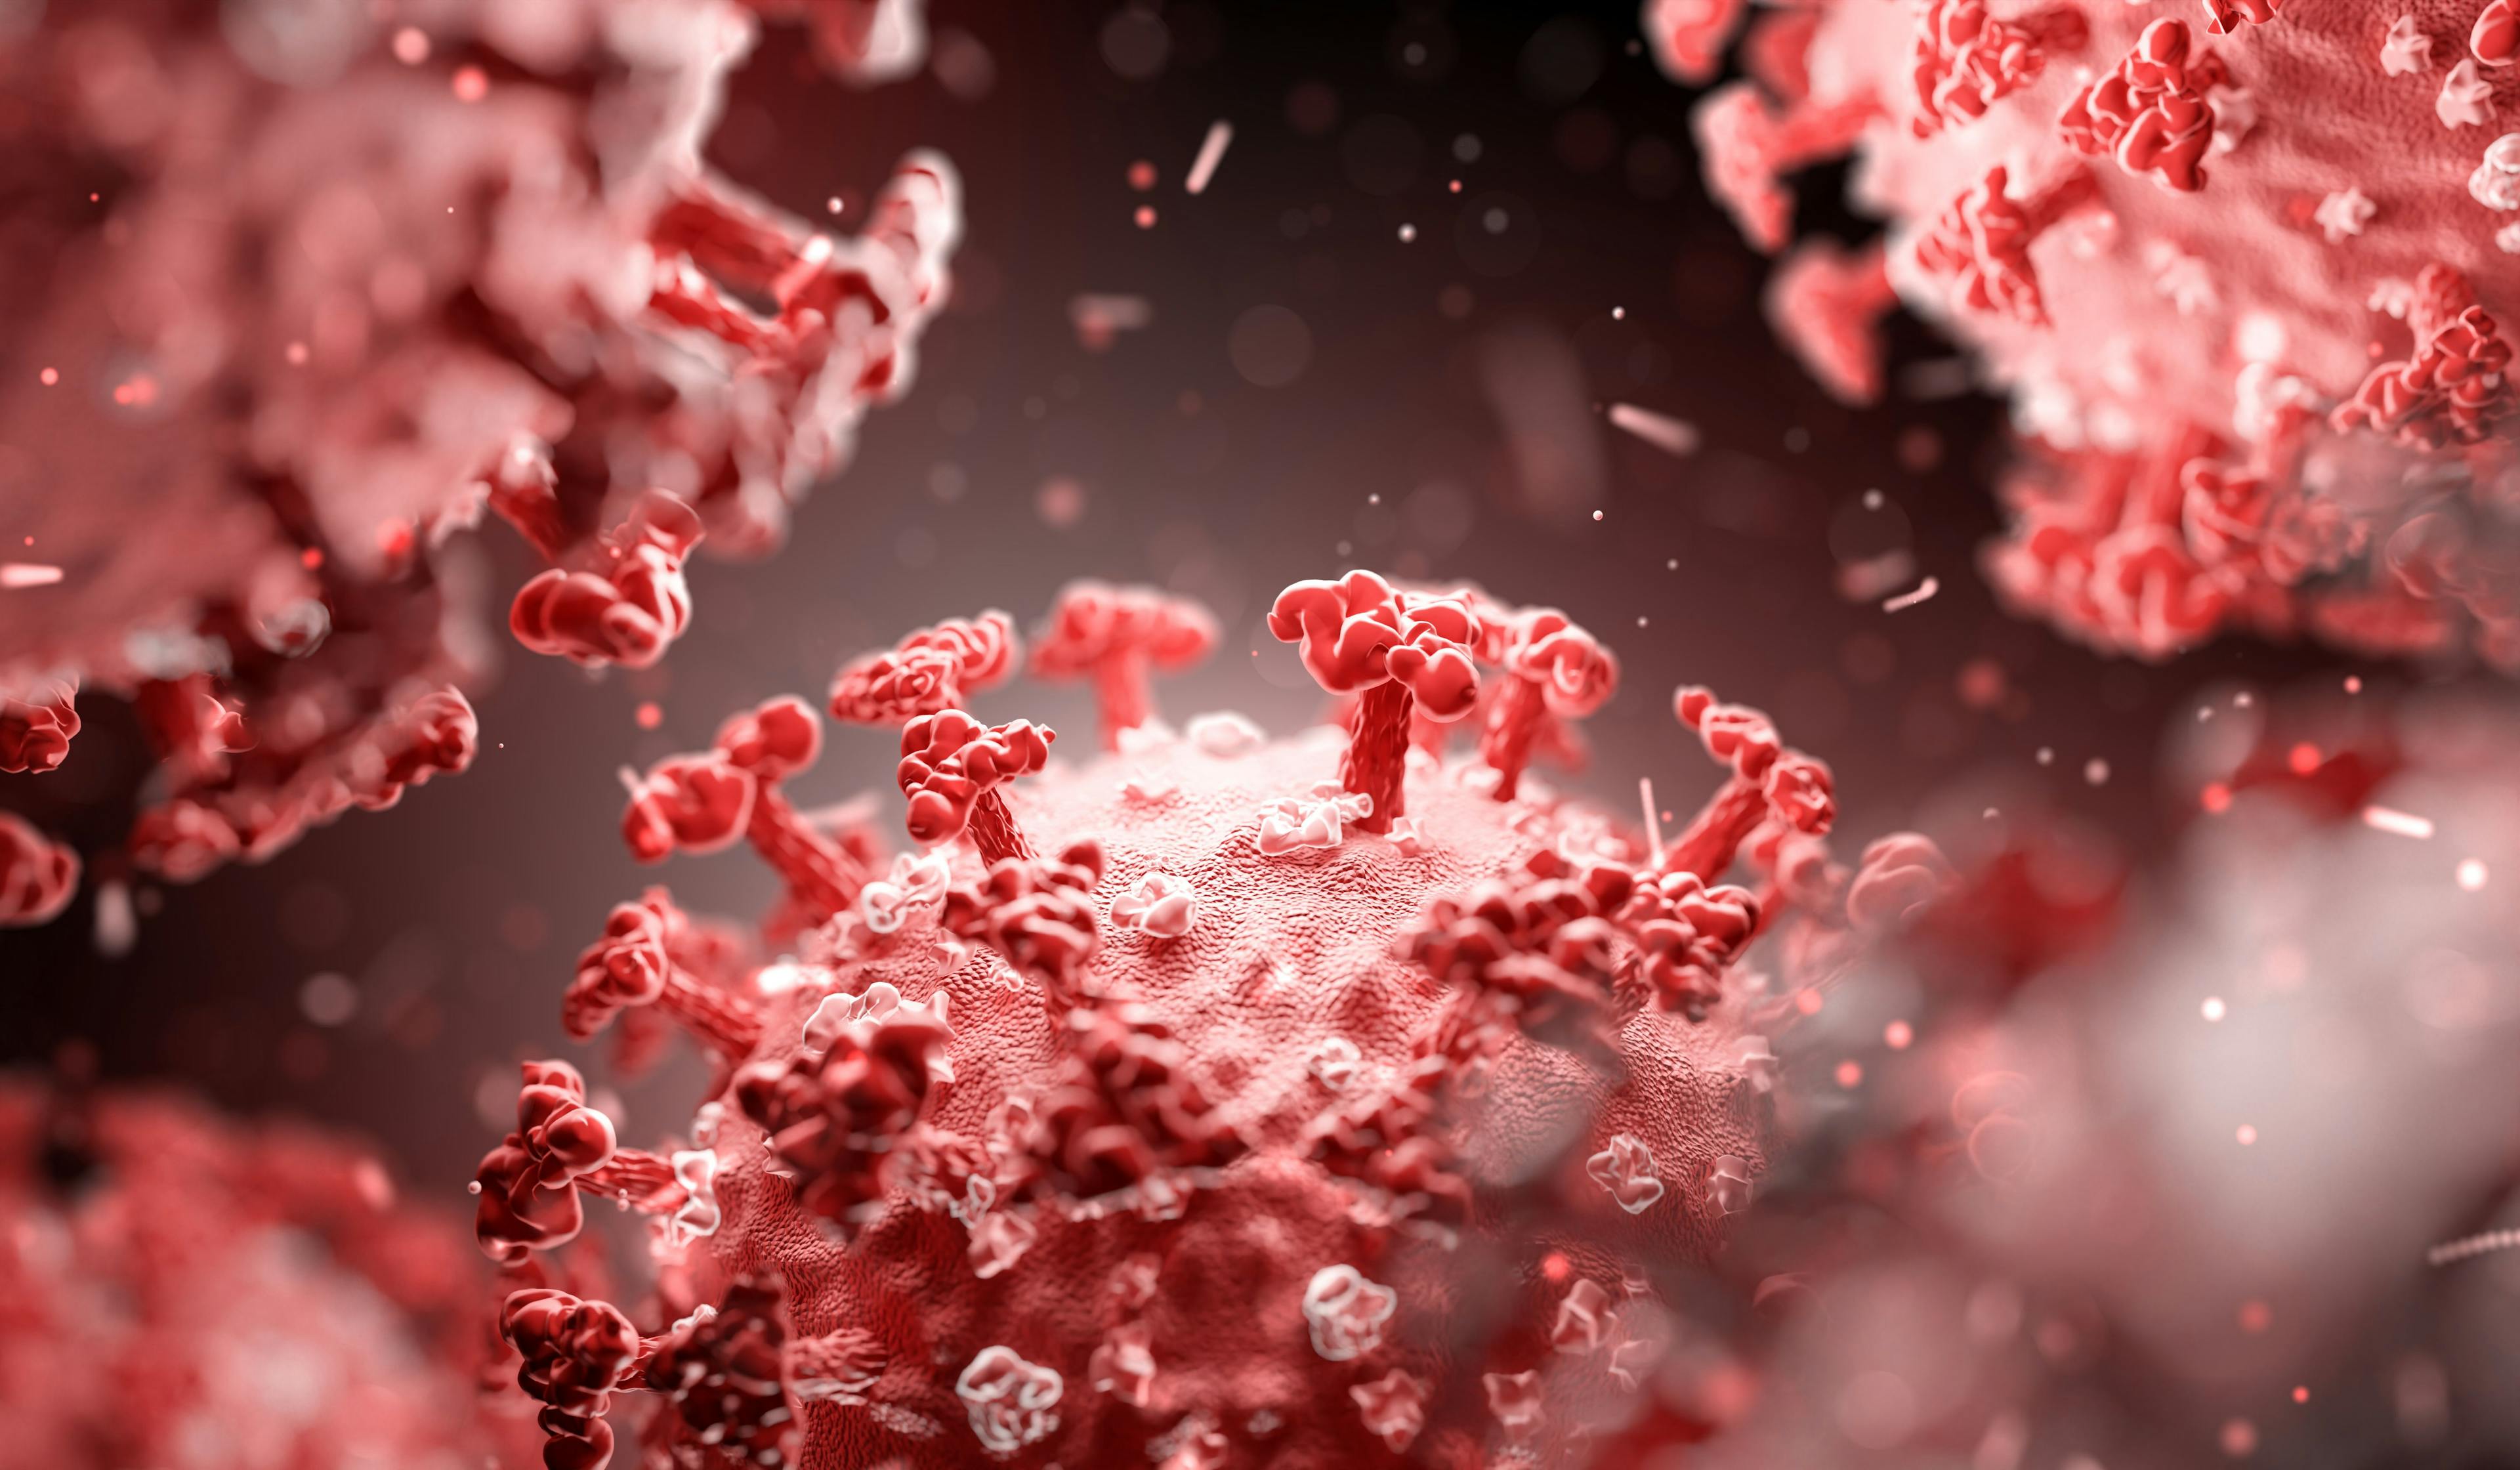 COVID-19 Cell Therapy Trial Completes Dosing